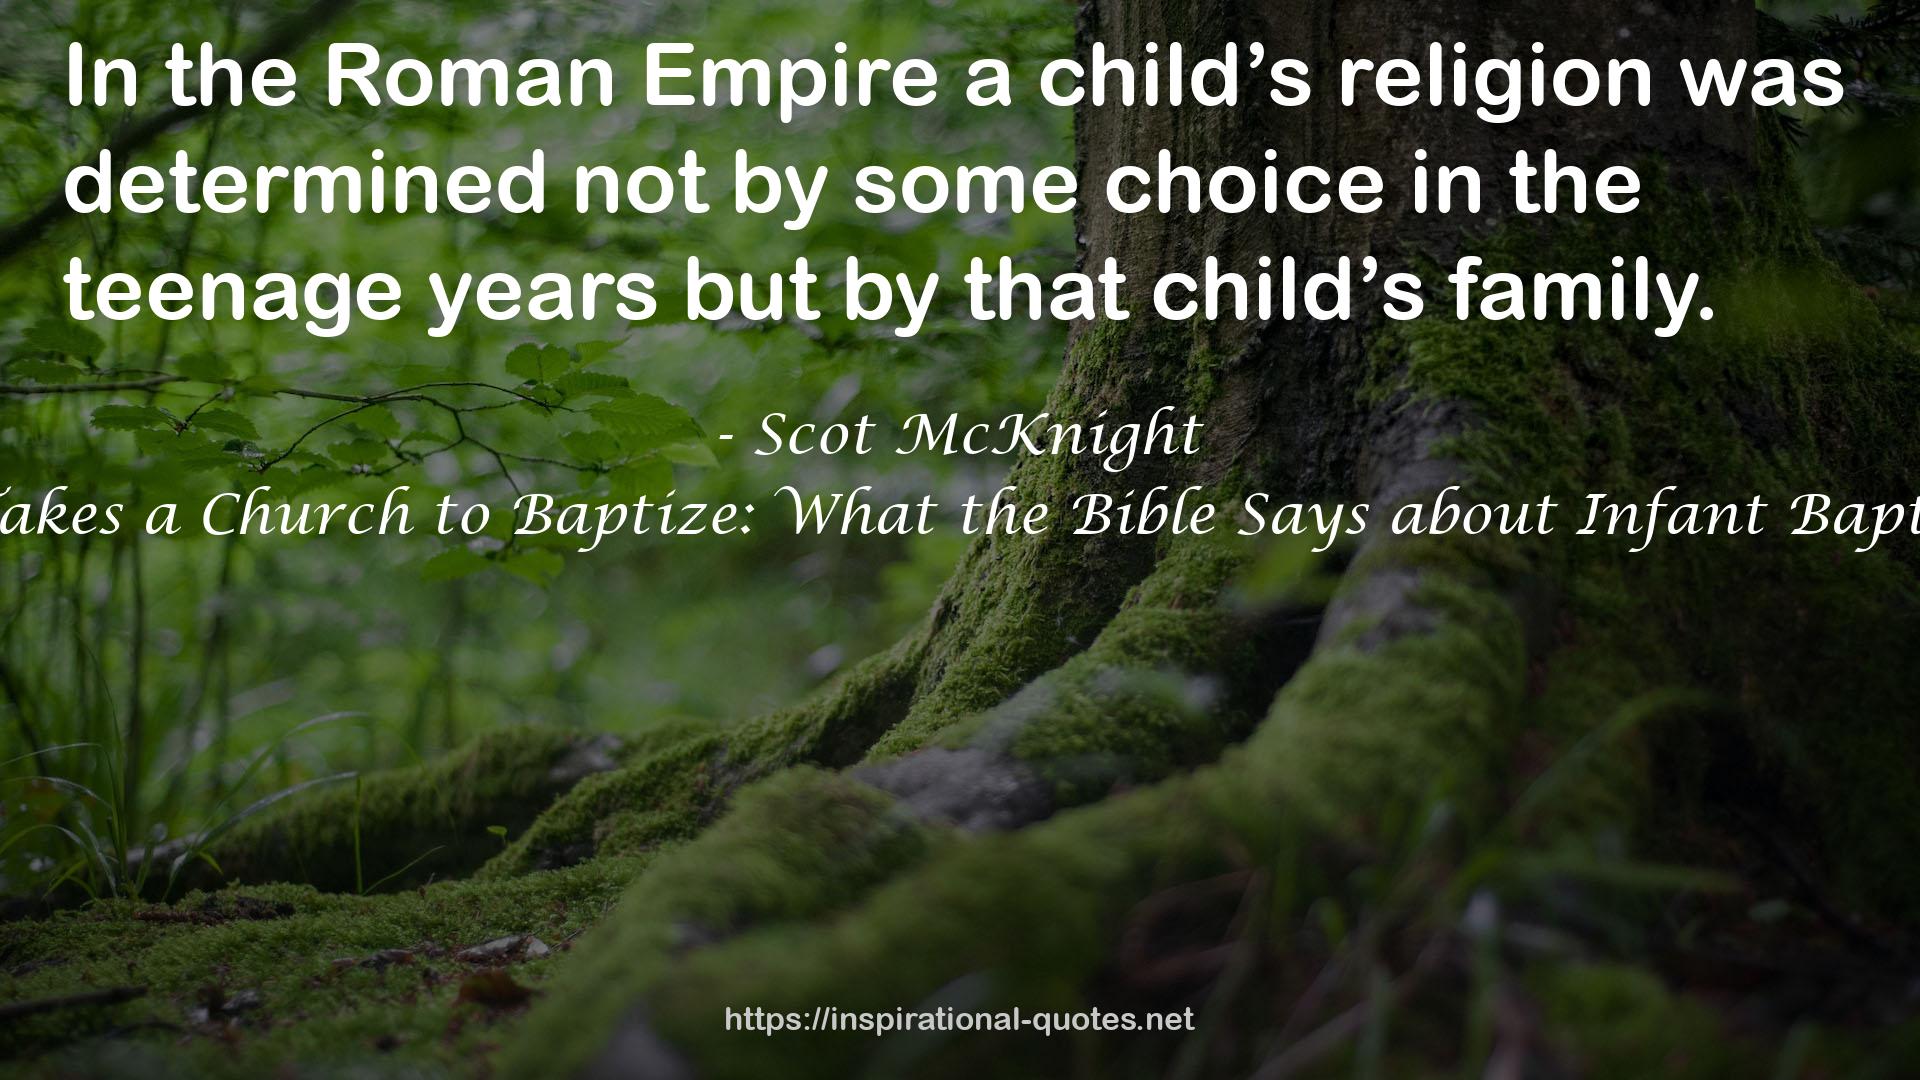 It Takes a Church to Baptize: What the Bible Says about Infant Baptism QUOTES